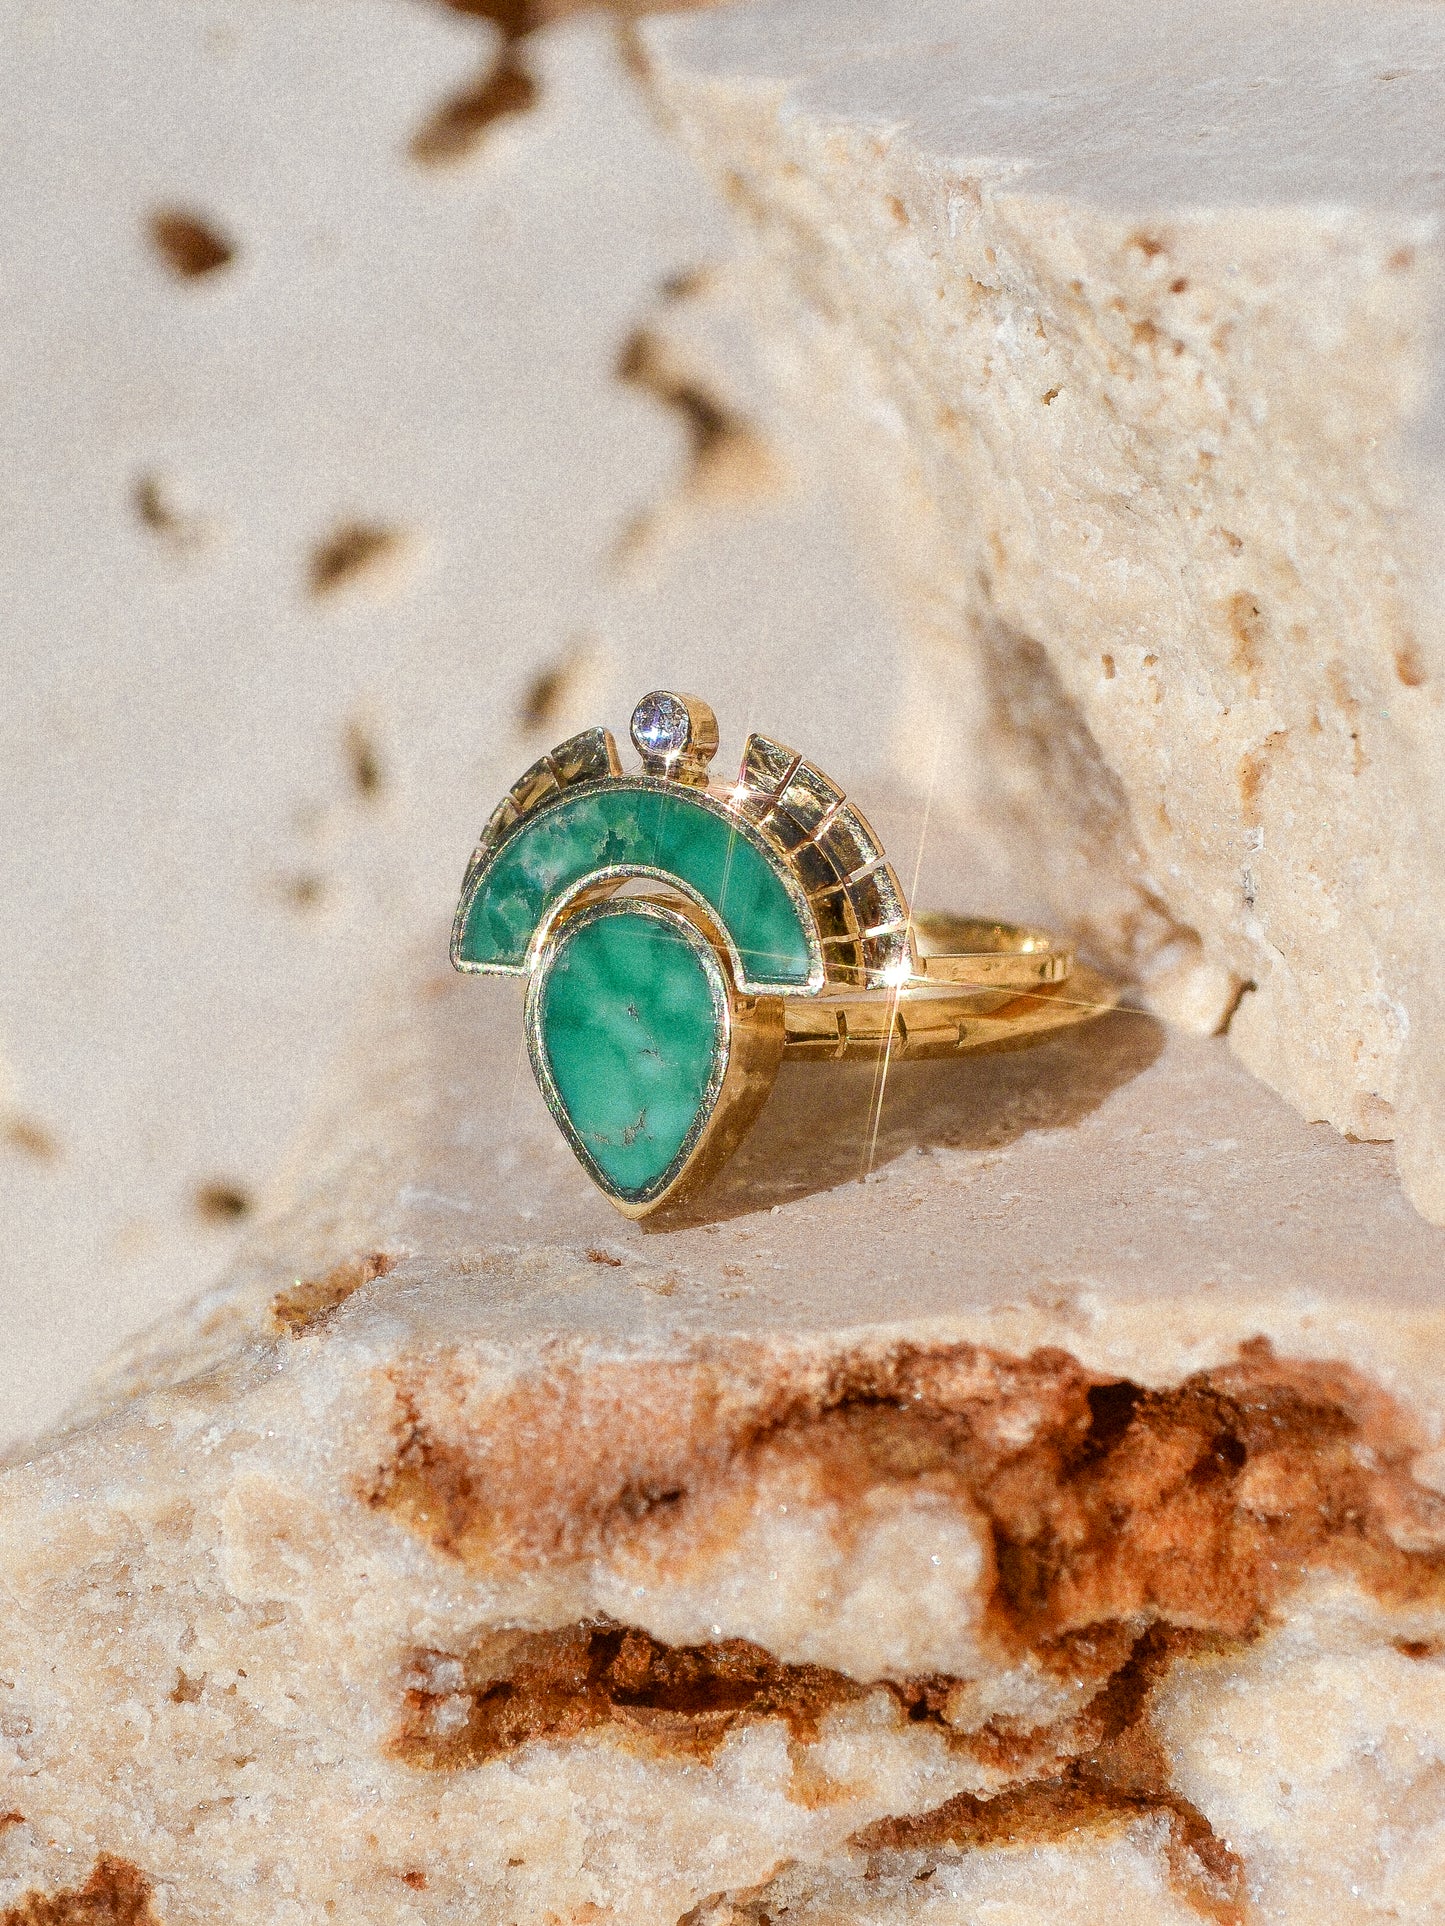 RISING SOL ARCH CROWN / The inlaid Broken Arrow turquoise is hand cut and shaped to fit perfectly inside this 14K gold bezel. A Young in the Mountain signature carved halo features a .03 ct conflict-free white diamond that brings beautiful light to this piece